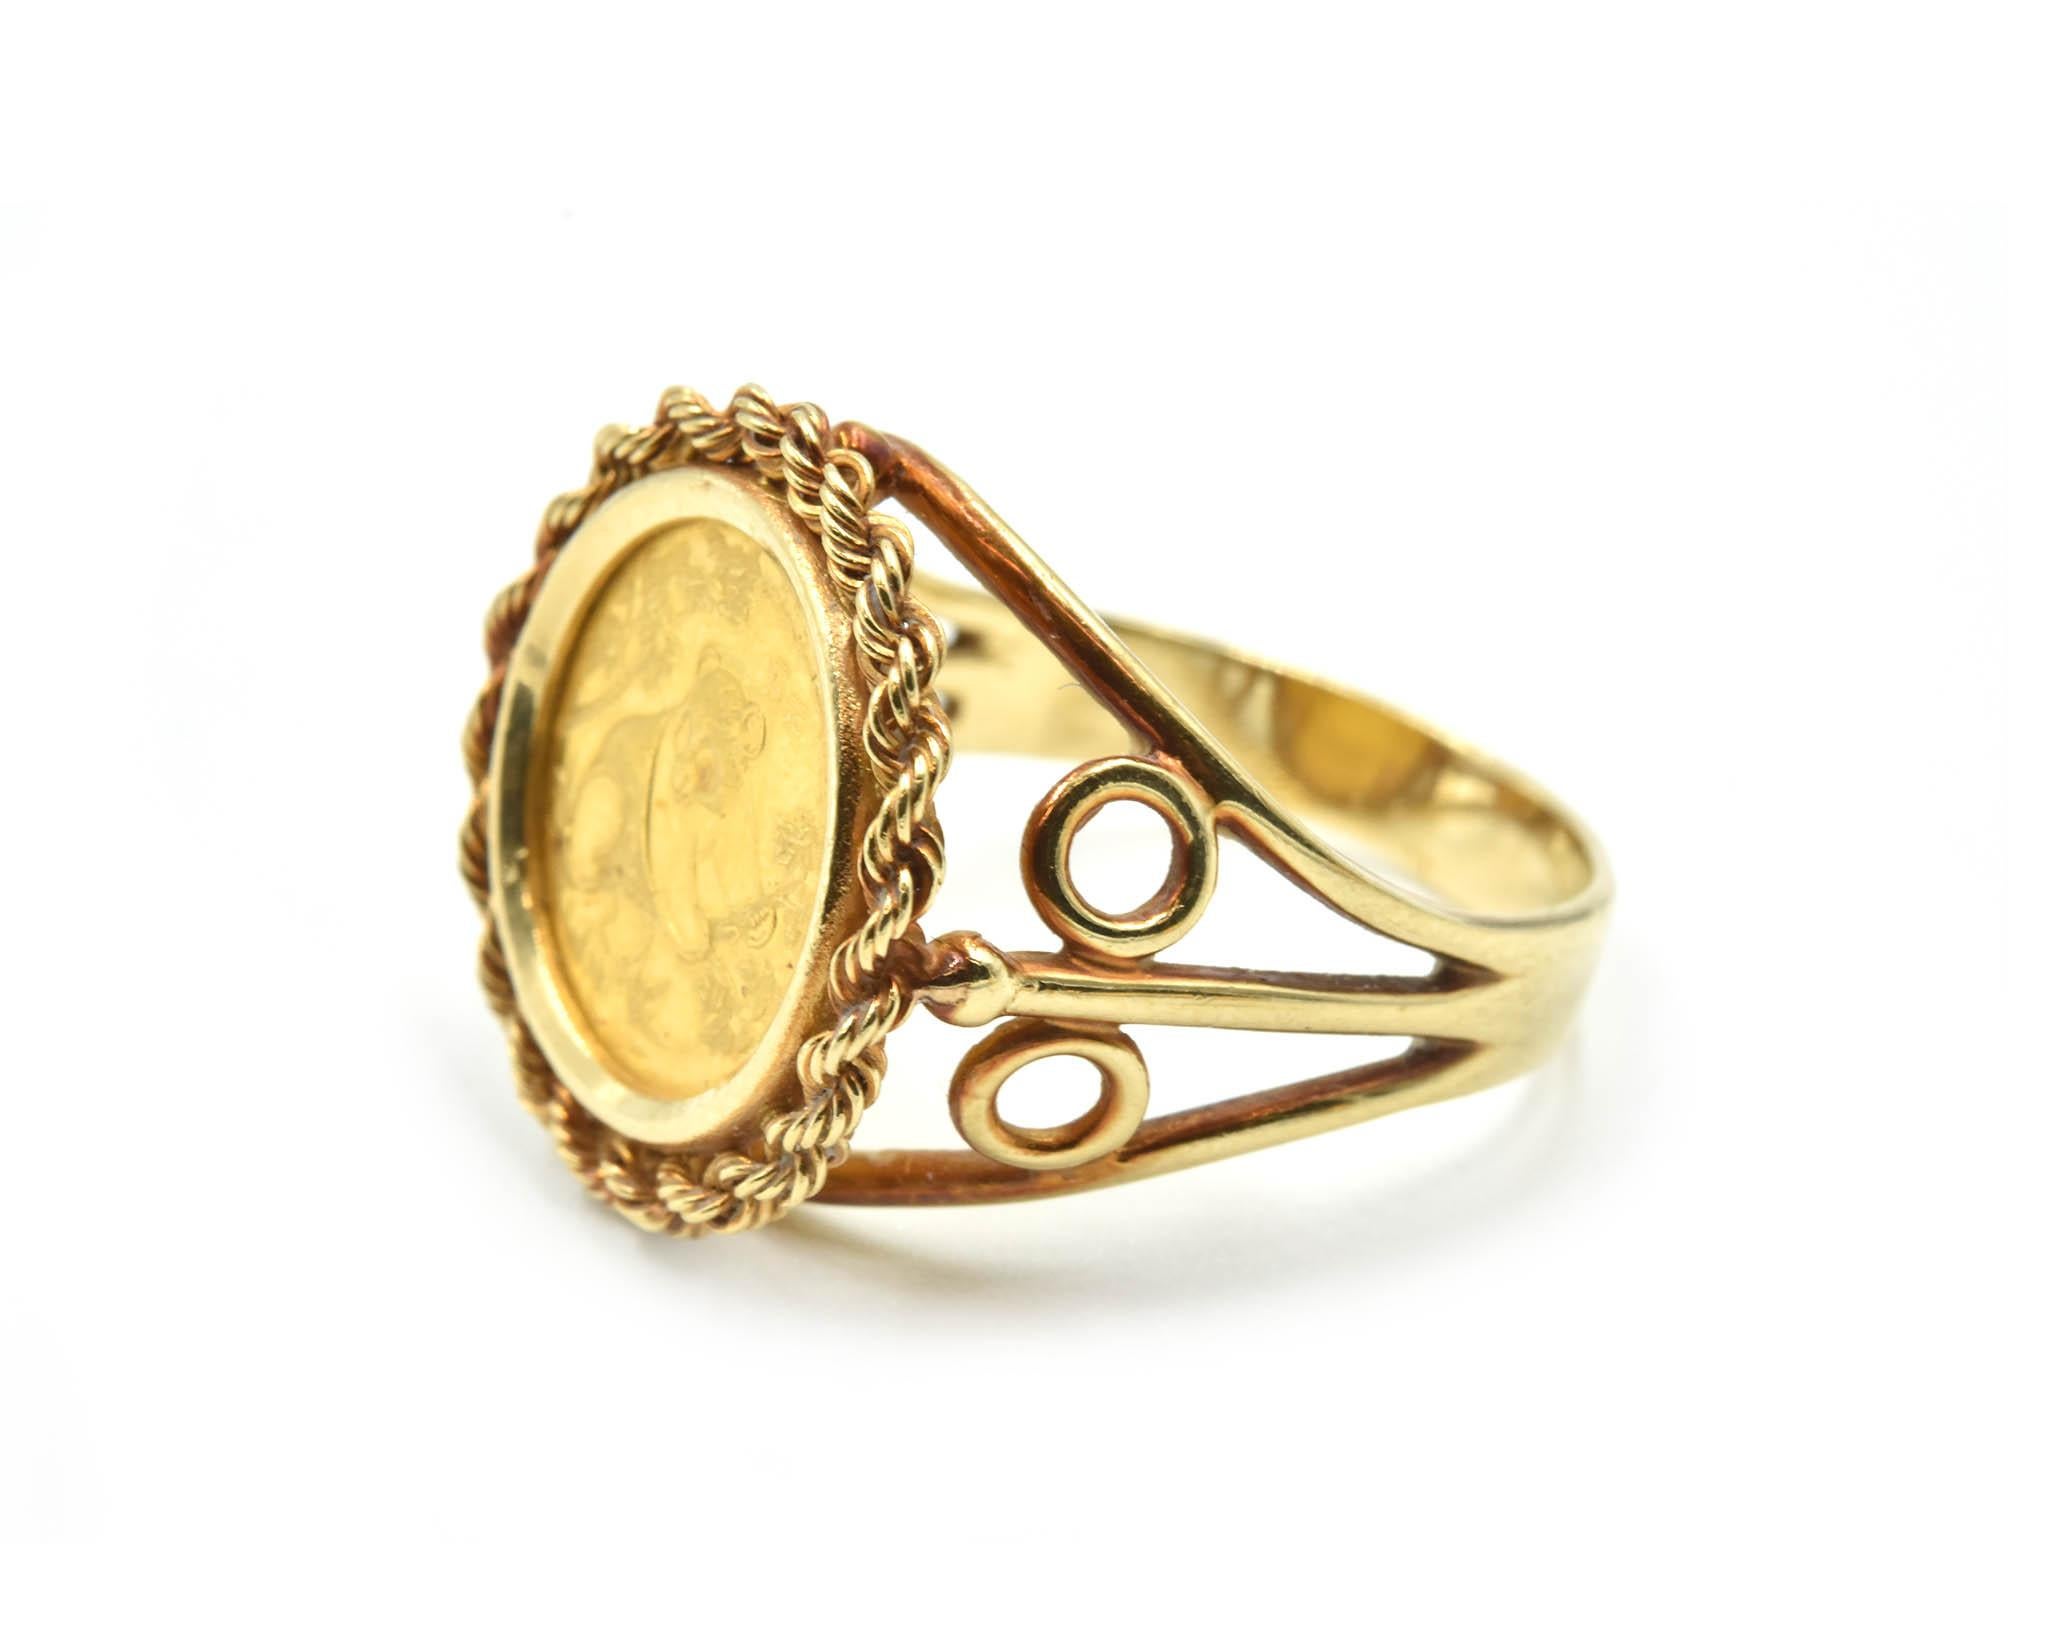 Designer: custom design
Material: 14k yellow gold
Dimensions: ring top measures 3/4-inches in diameter
Ring Size: 8 1/4 (please allow two additional shipping days for sizing requests)
Weight: 5.90 grams
